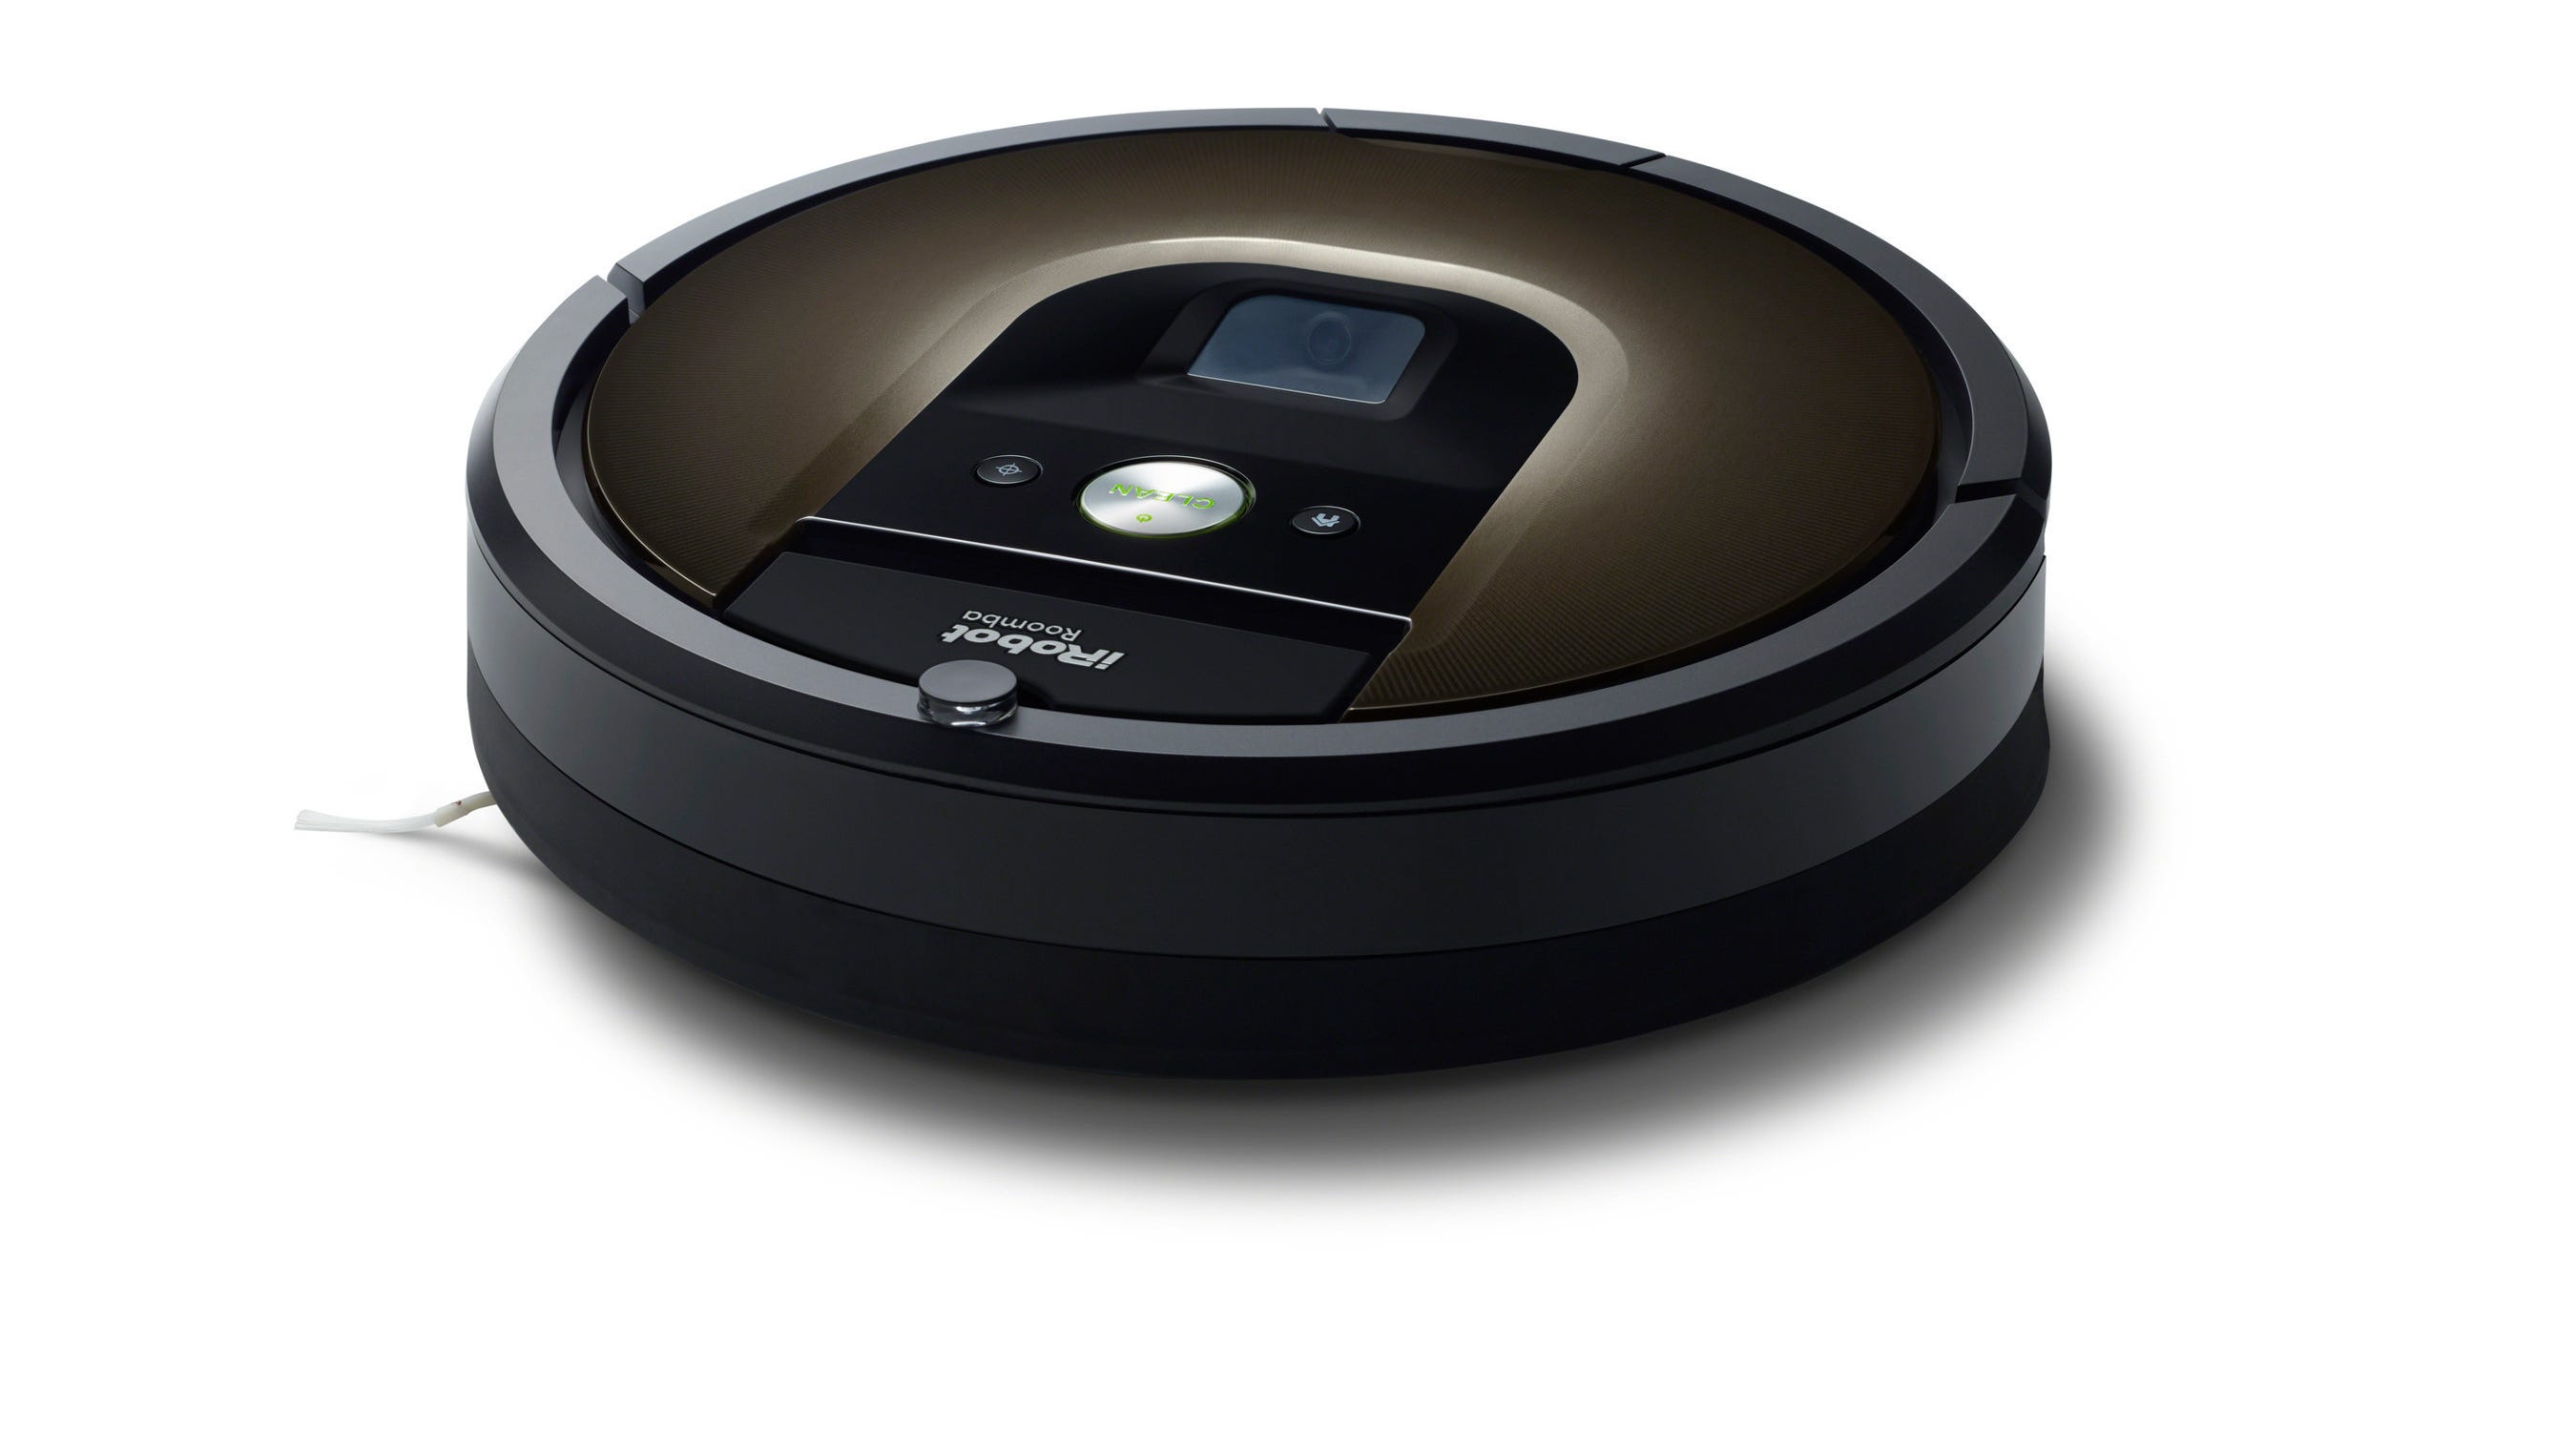 The inventor of the Roomba, a southwest Missouri native, is about to  release a new robot